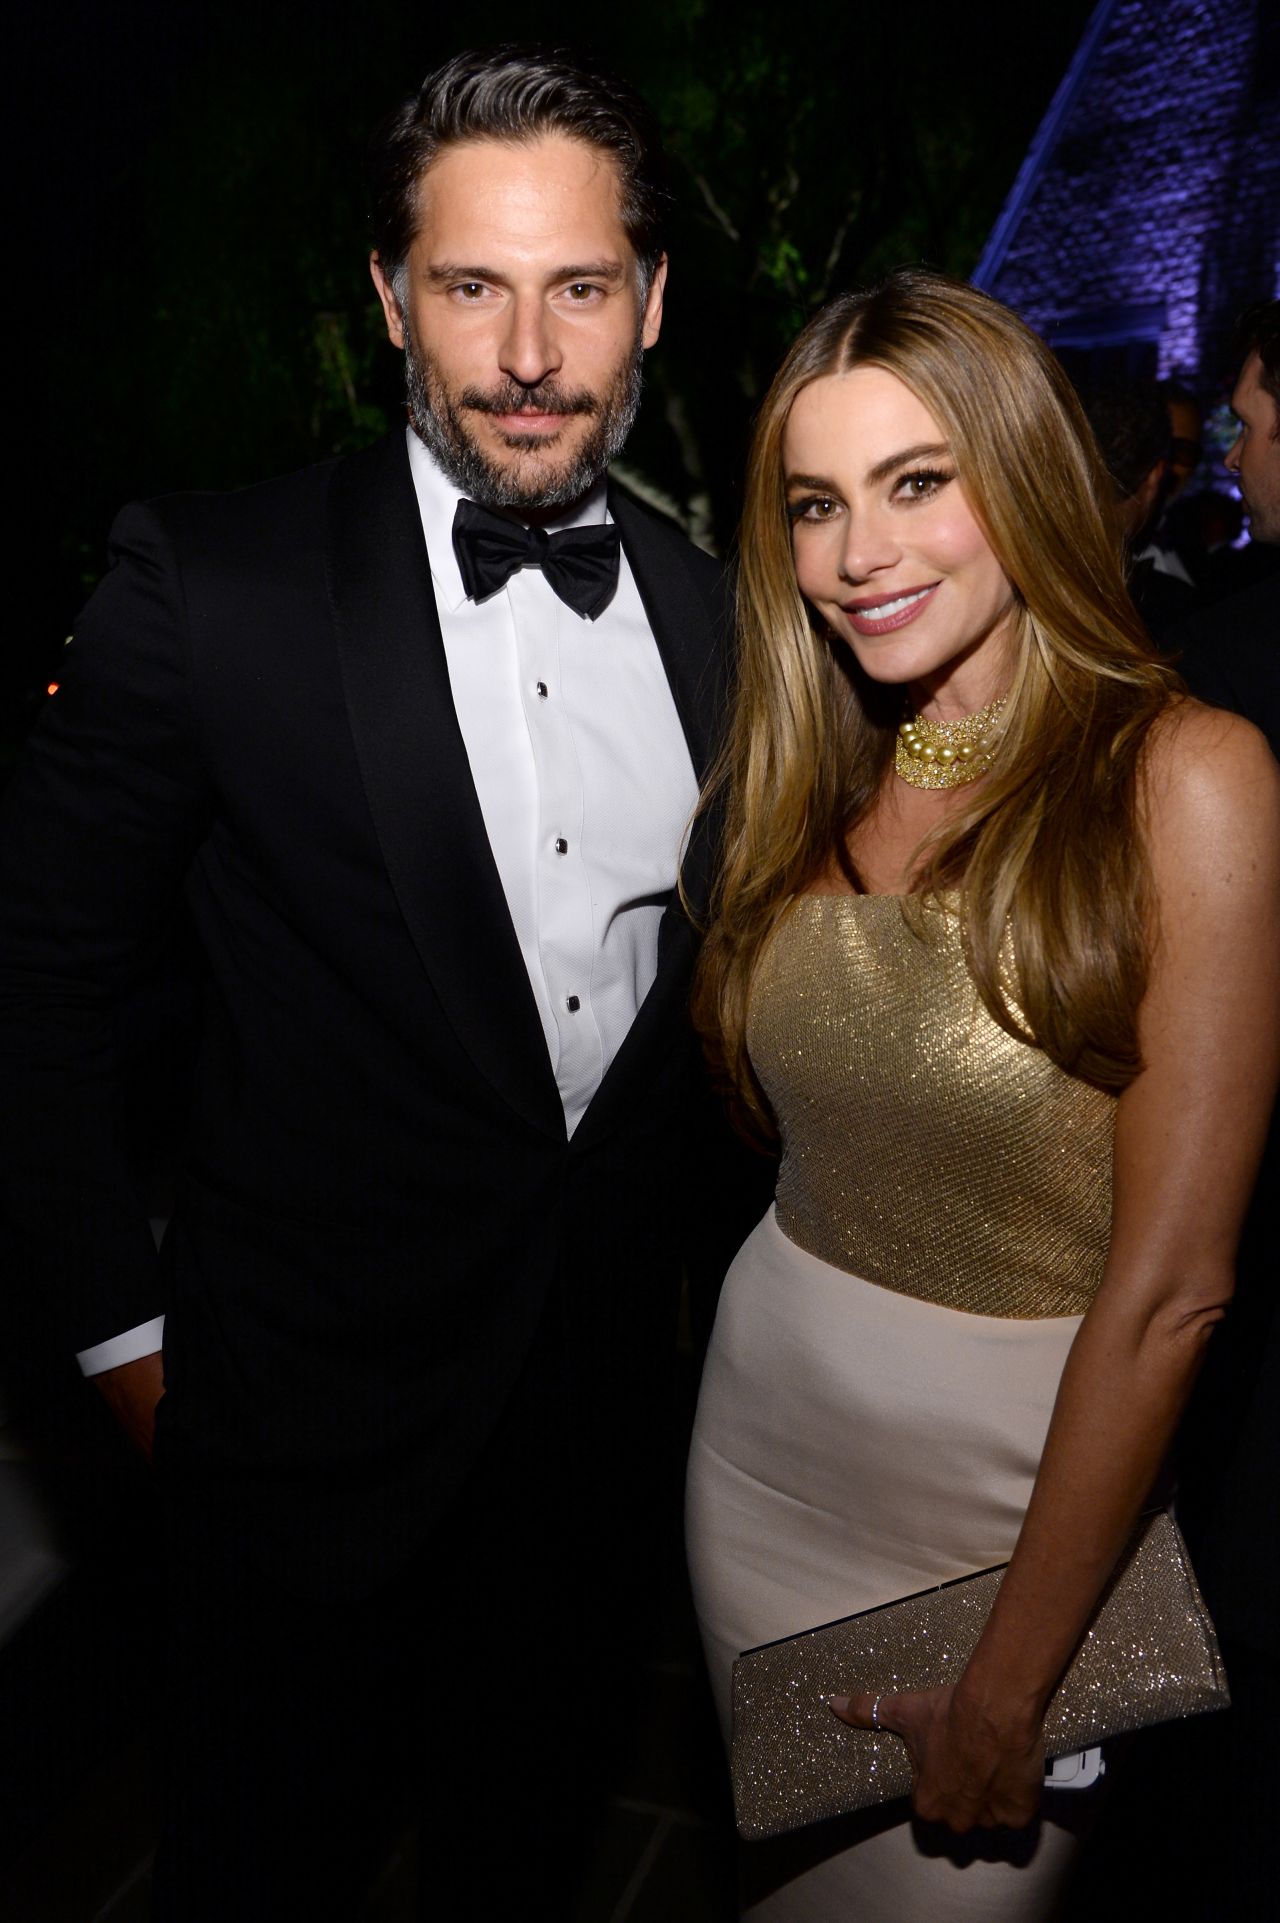 Sofia Vergara moved on from an engagement with Nick Loeb to dating "True Blood" star Joe Manganiello. The two were married in November 2015. 